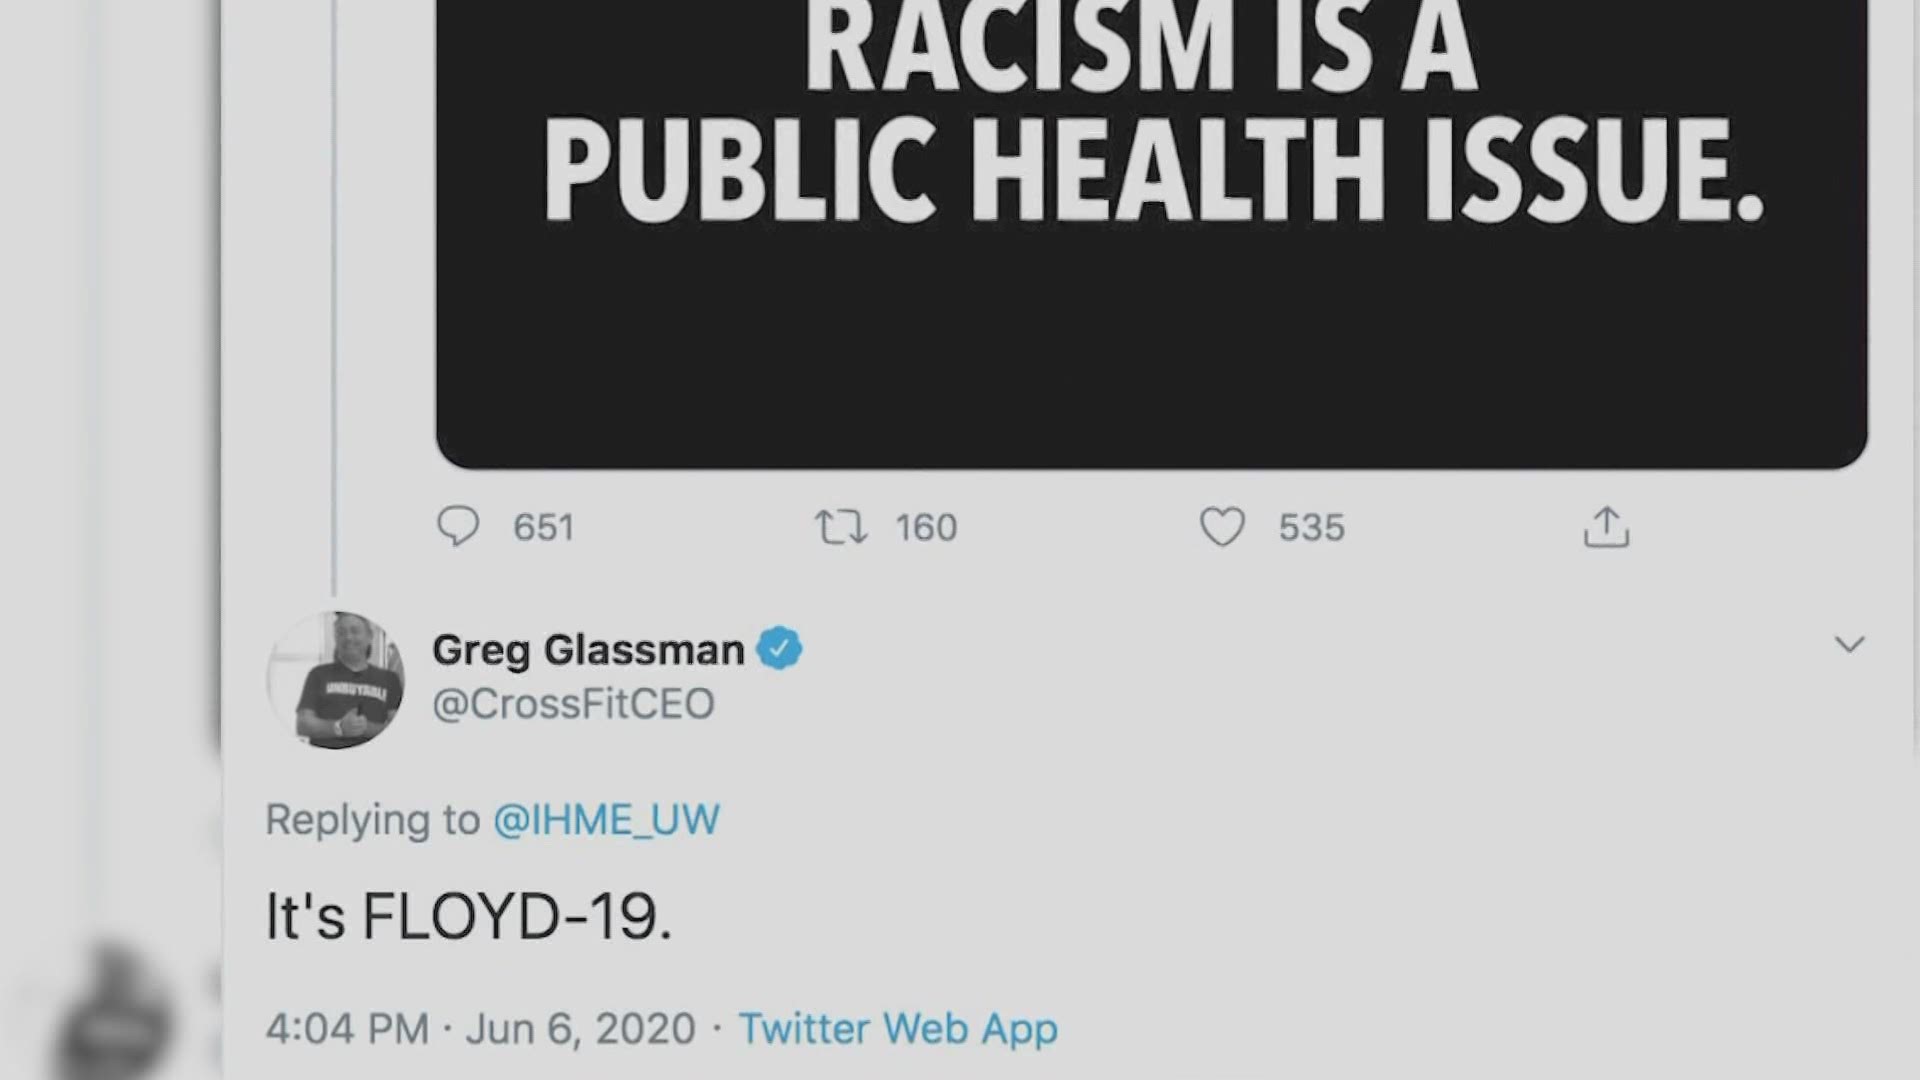 After a tweet called racism a "public health issue," CrossFit CEO Greg Glassman responded, saying "It's FLOYD-19."